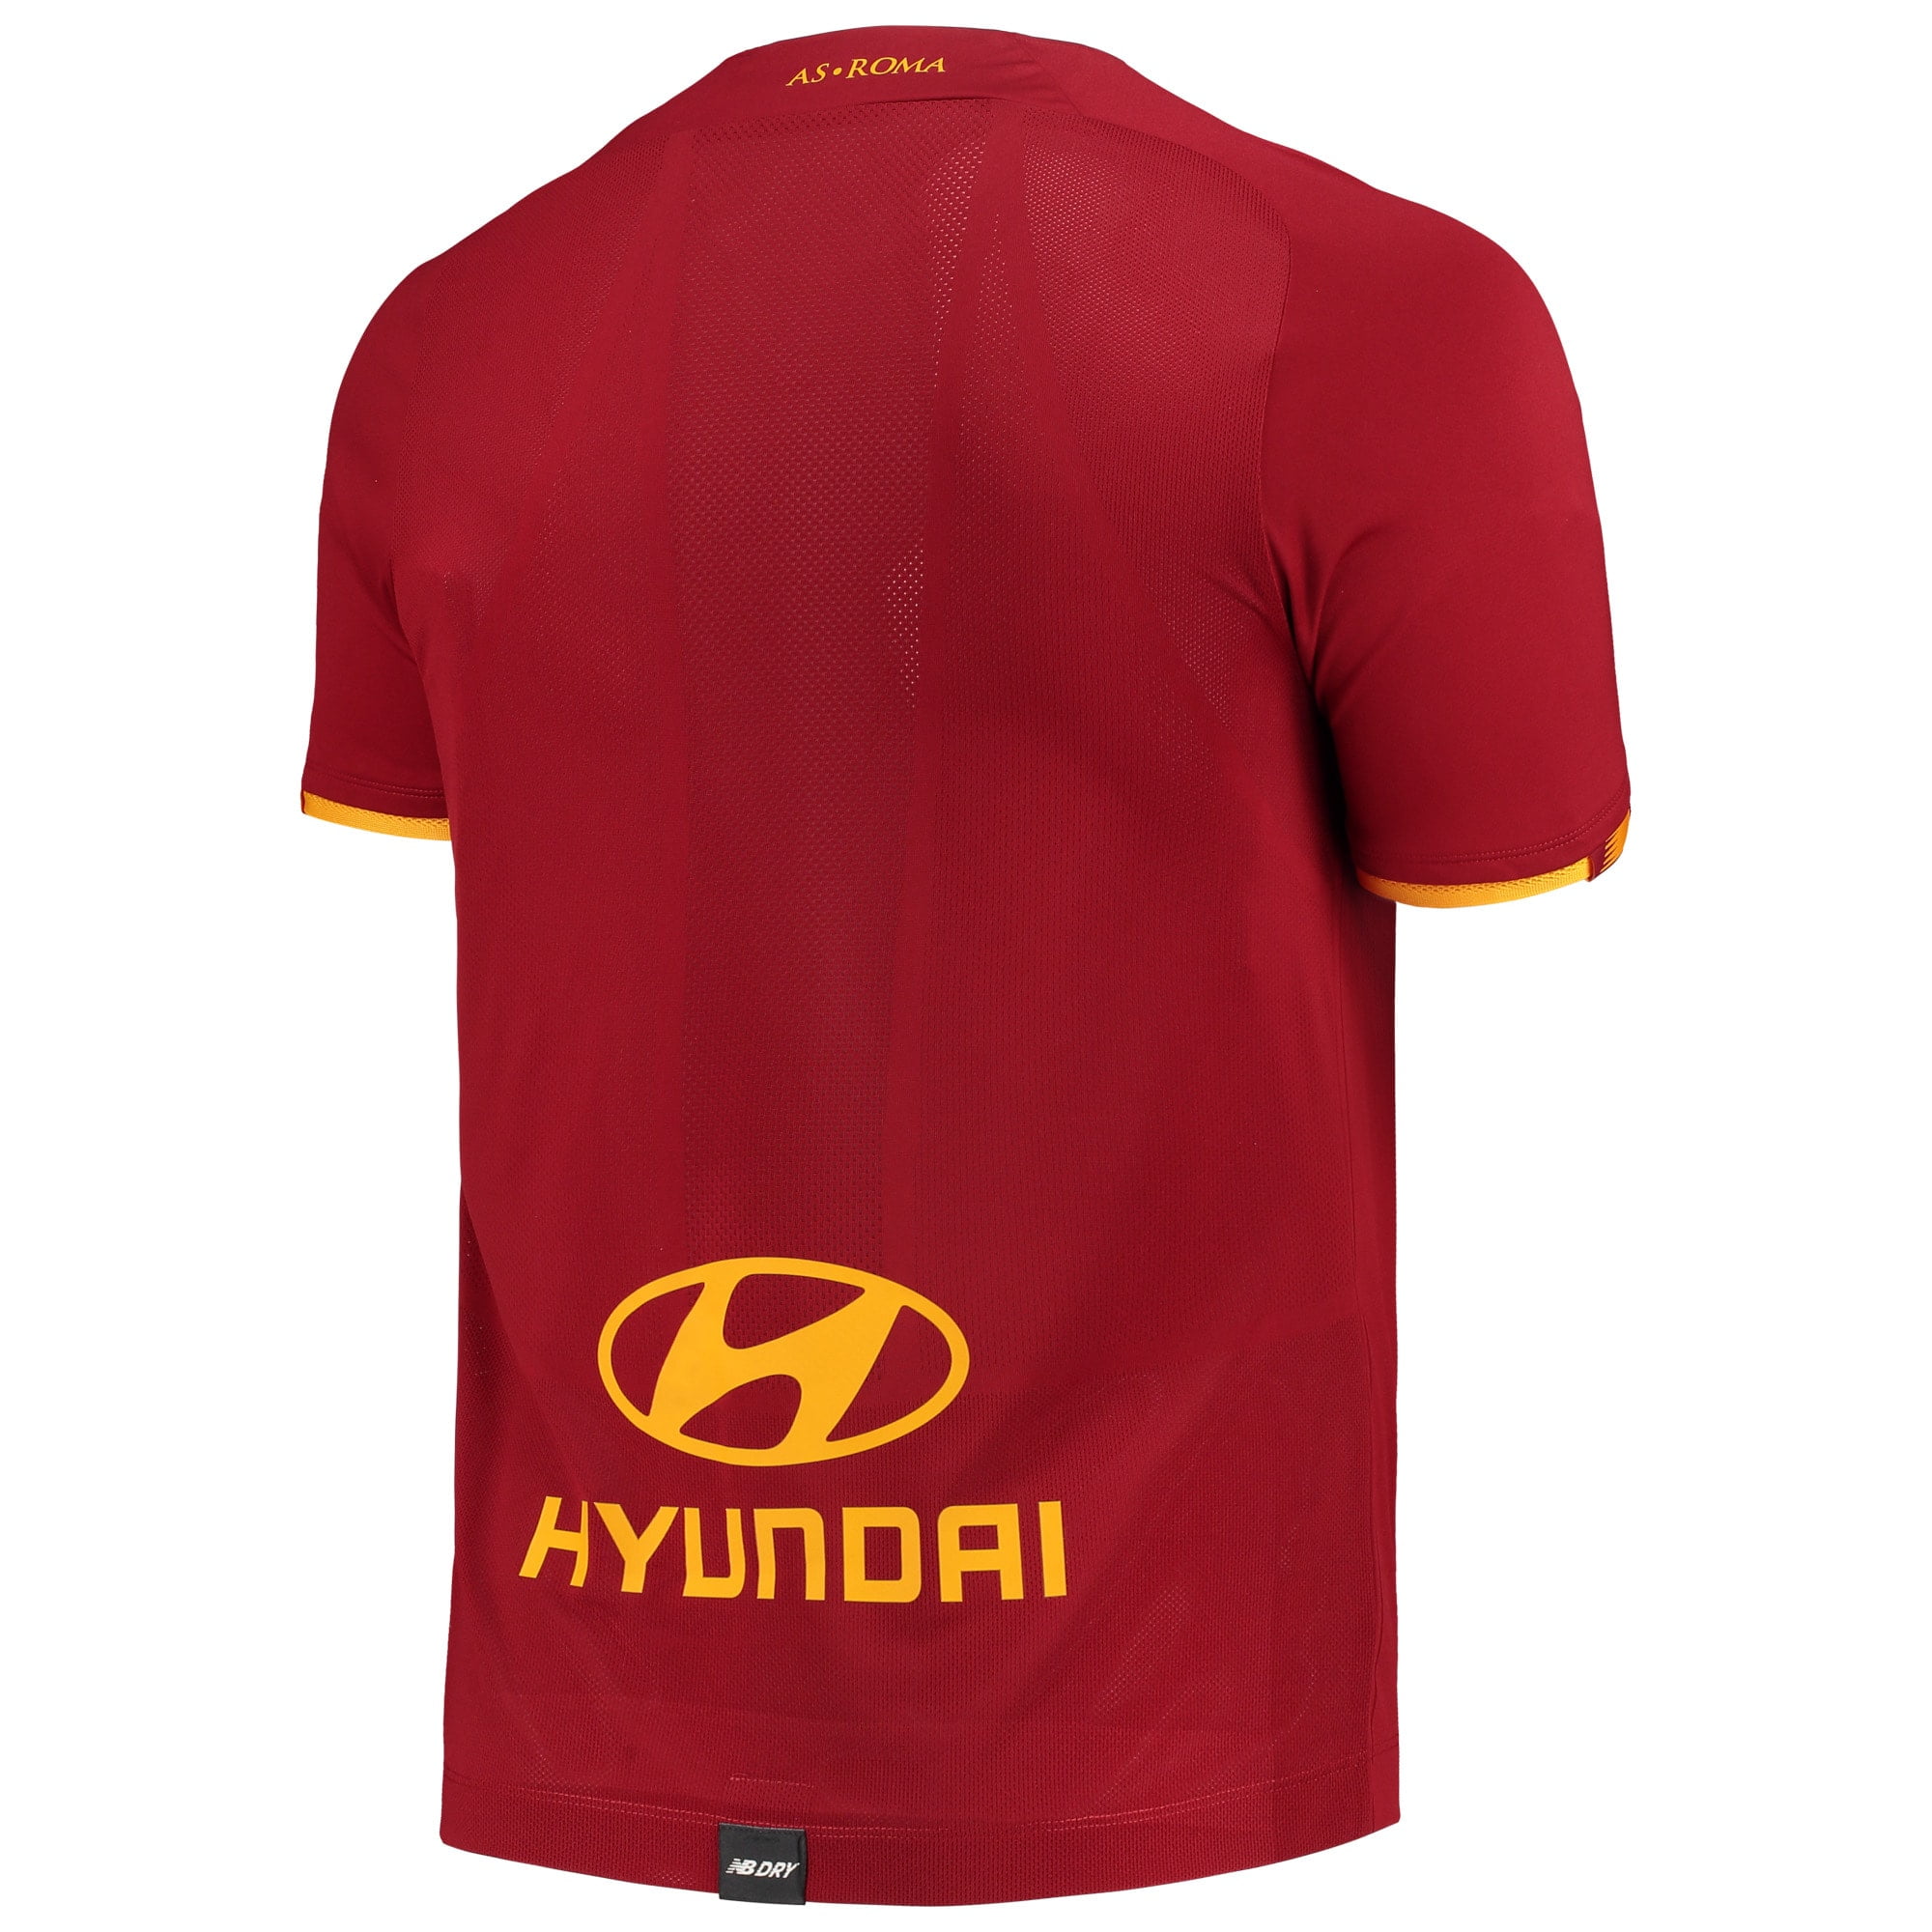 Replica Jersey, Home Red Sleeve